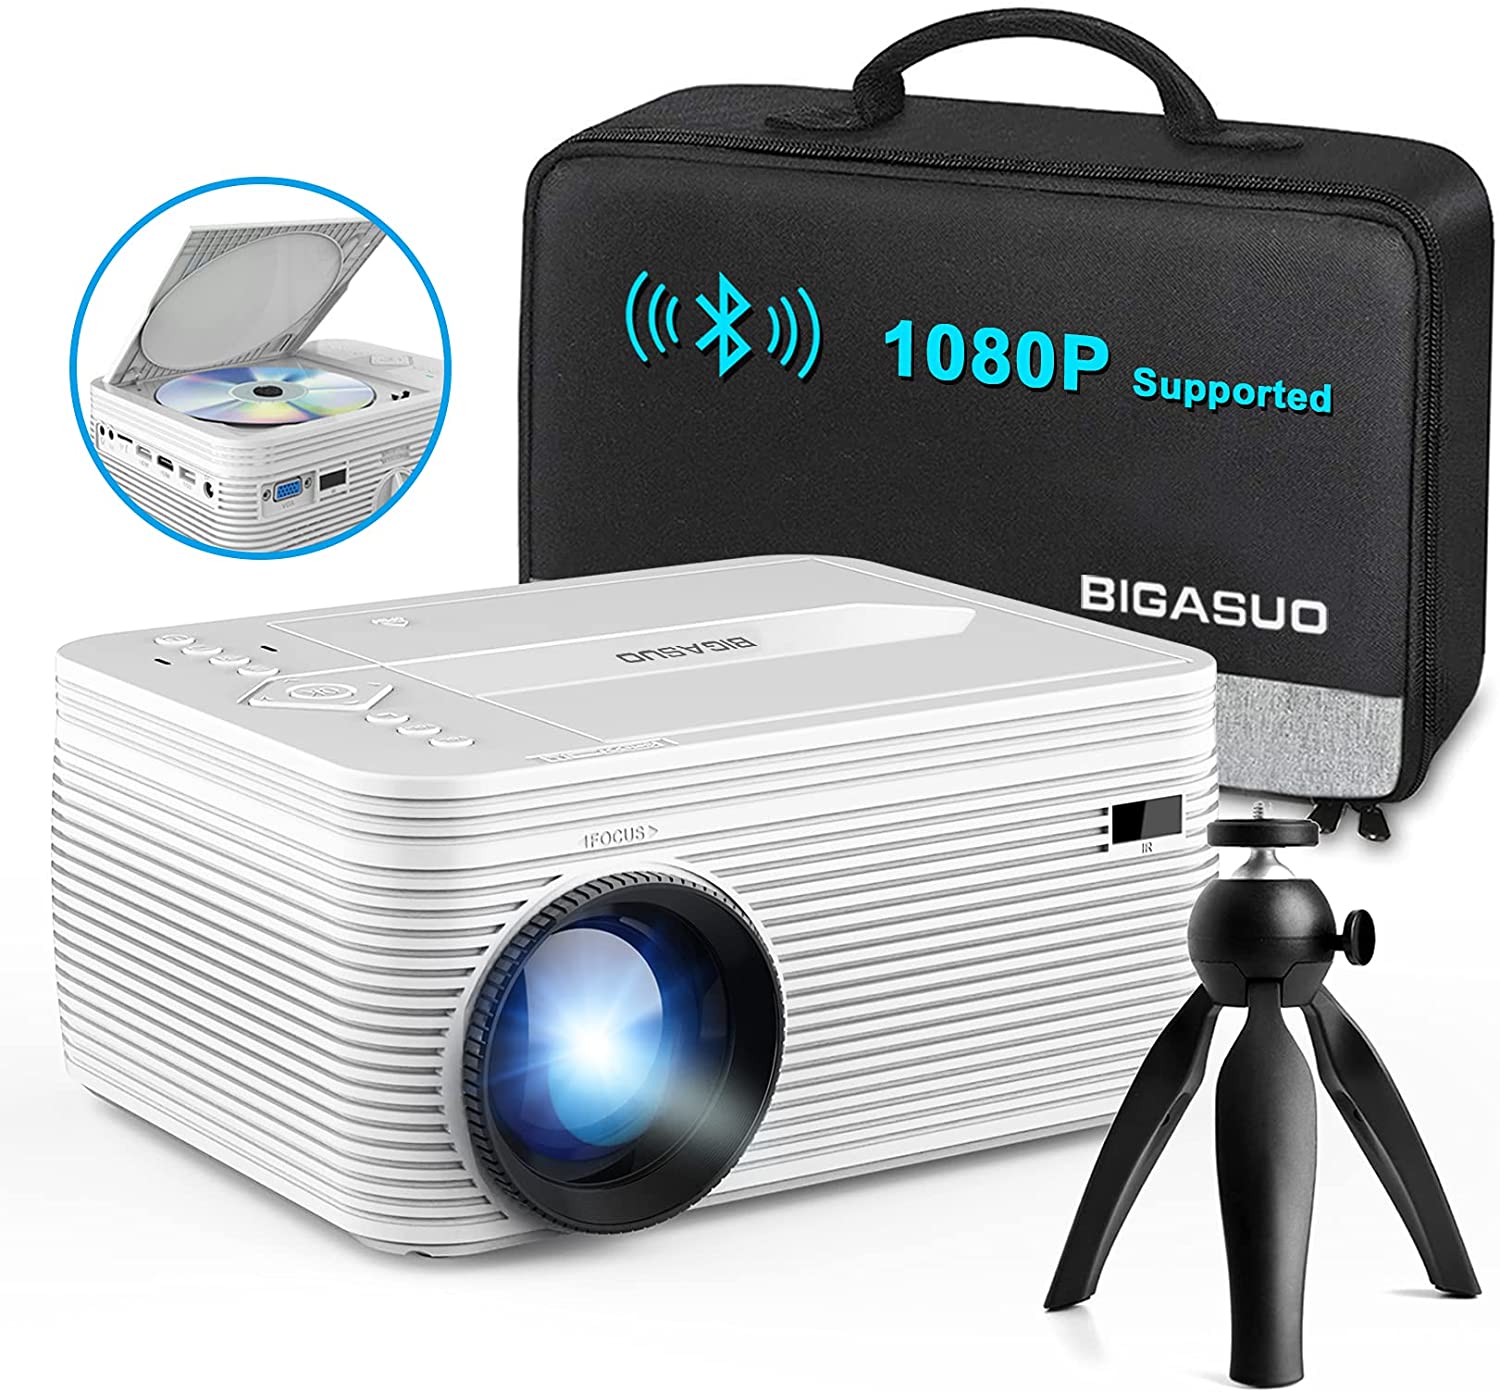 BIGASUO Upgrade HD Bluetooth Projector Built in DVD Player, Mini Video Projector 1080P Supported Compatible with TV:HDMI:VGA:AV:USB:TF SD Card, Portable